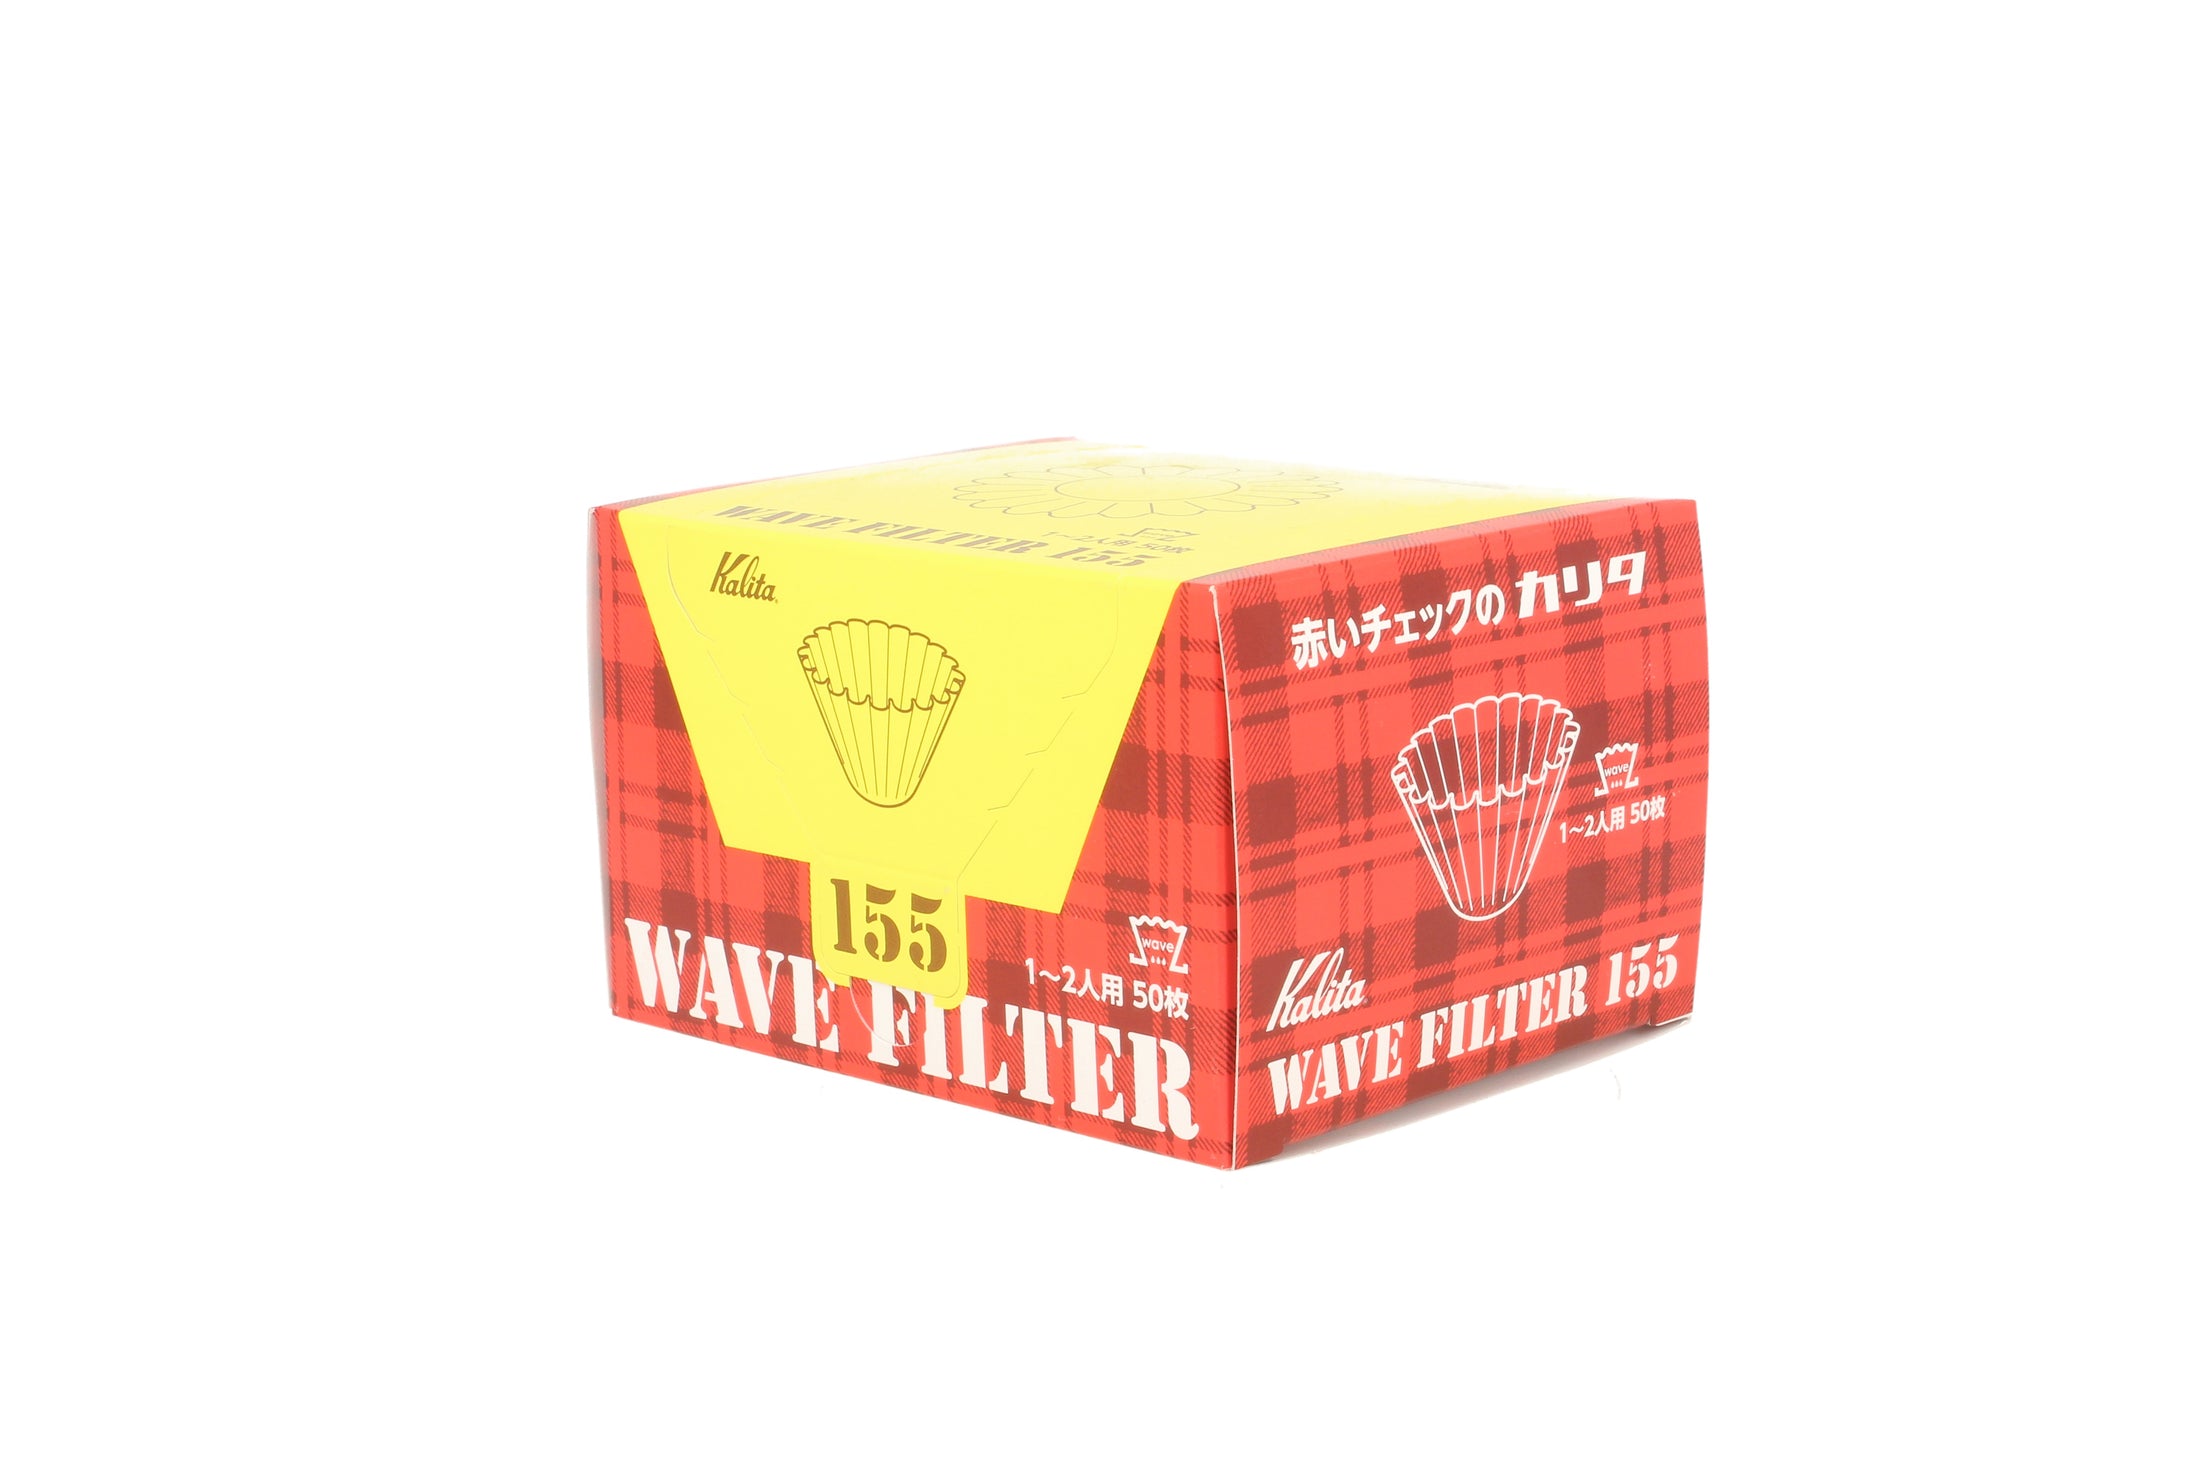 Kalita Wave #155 Paper Filters White - Pack of 50